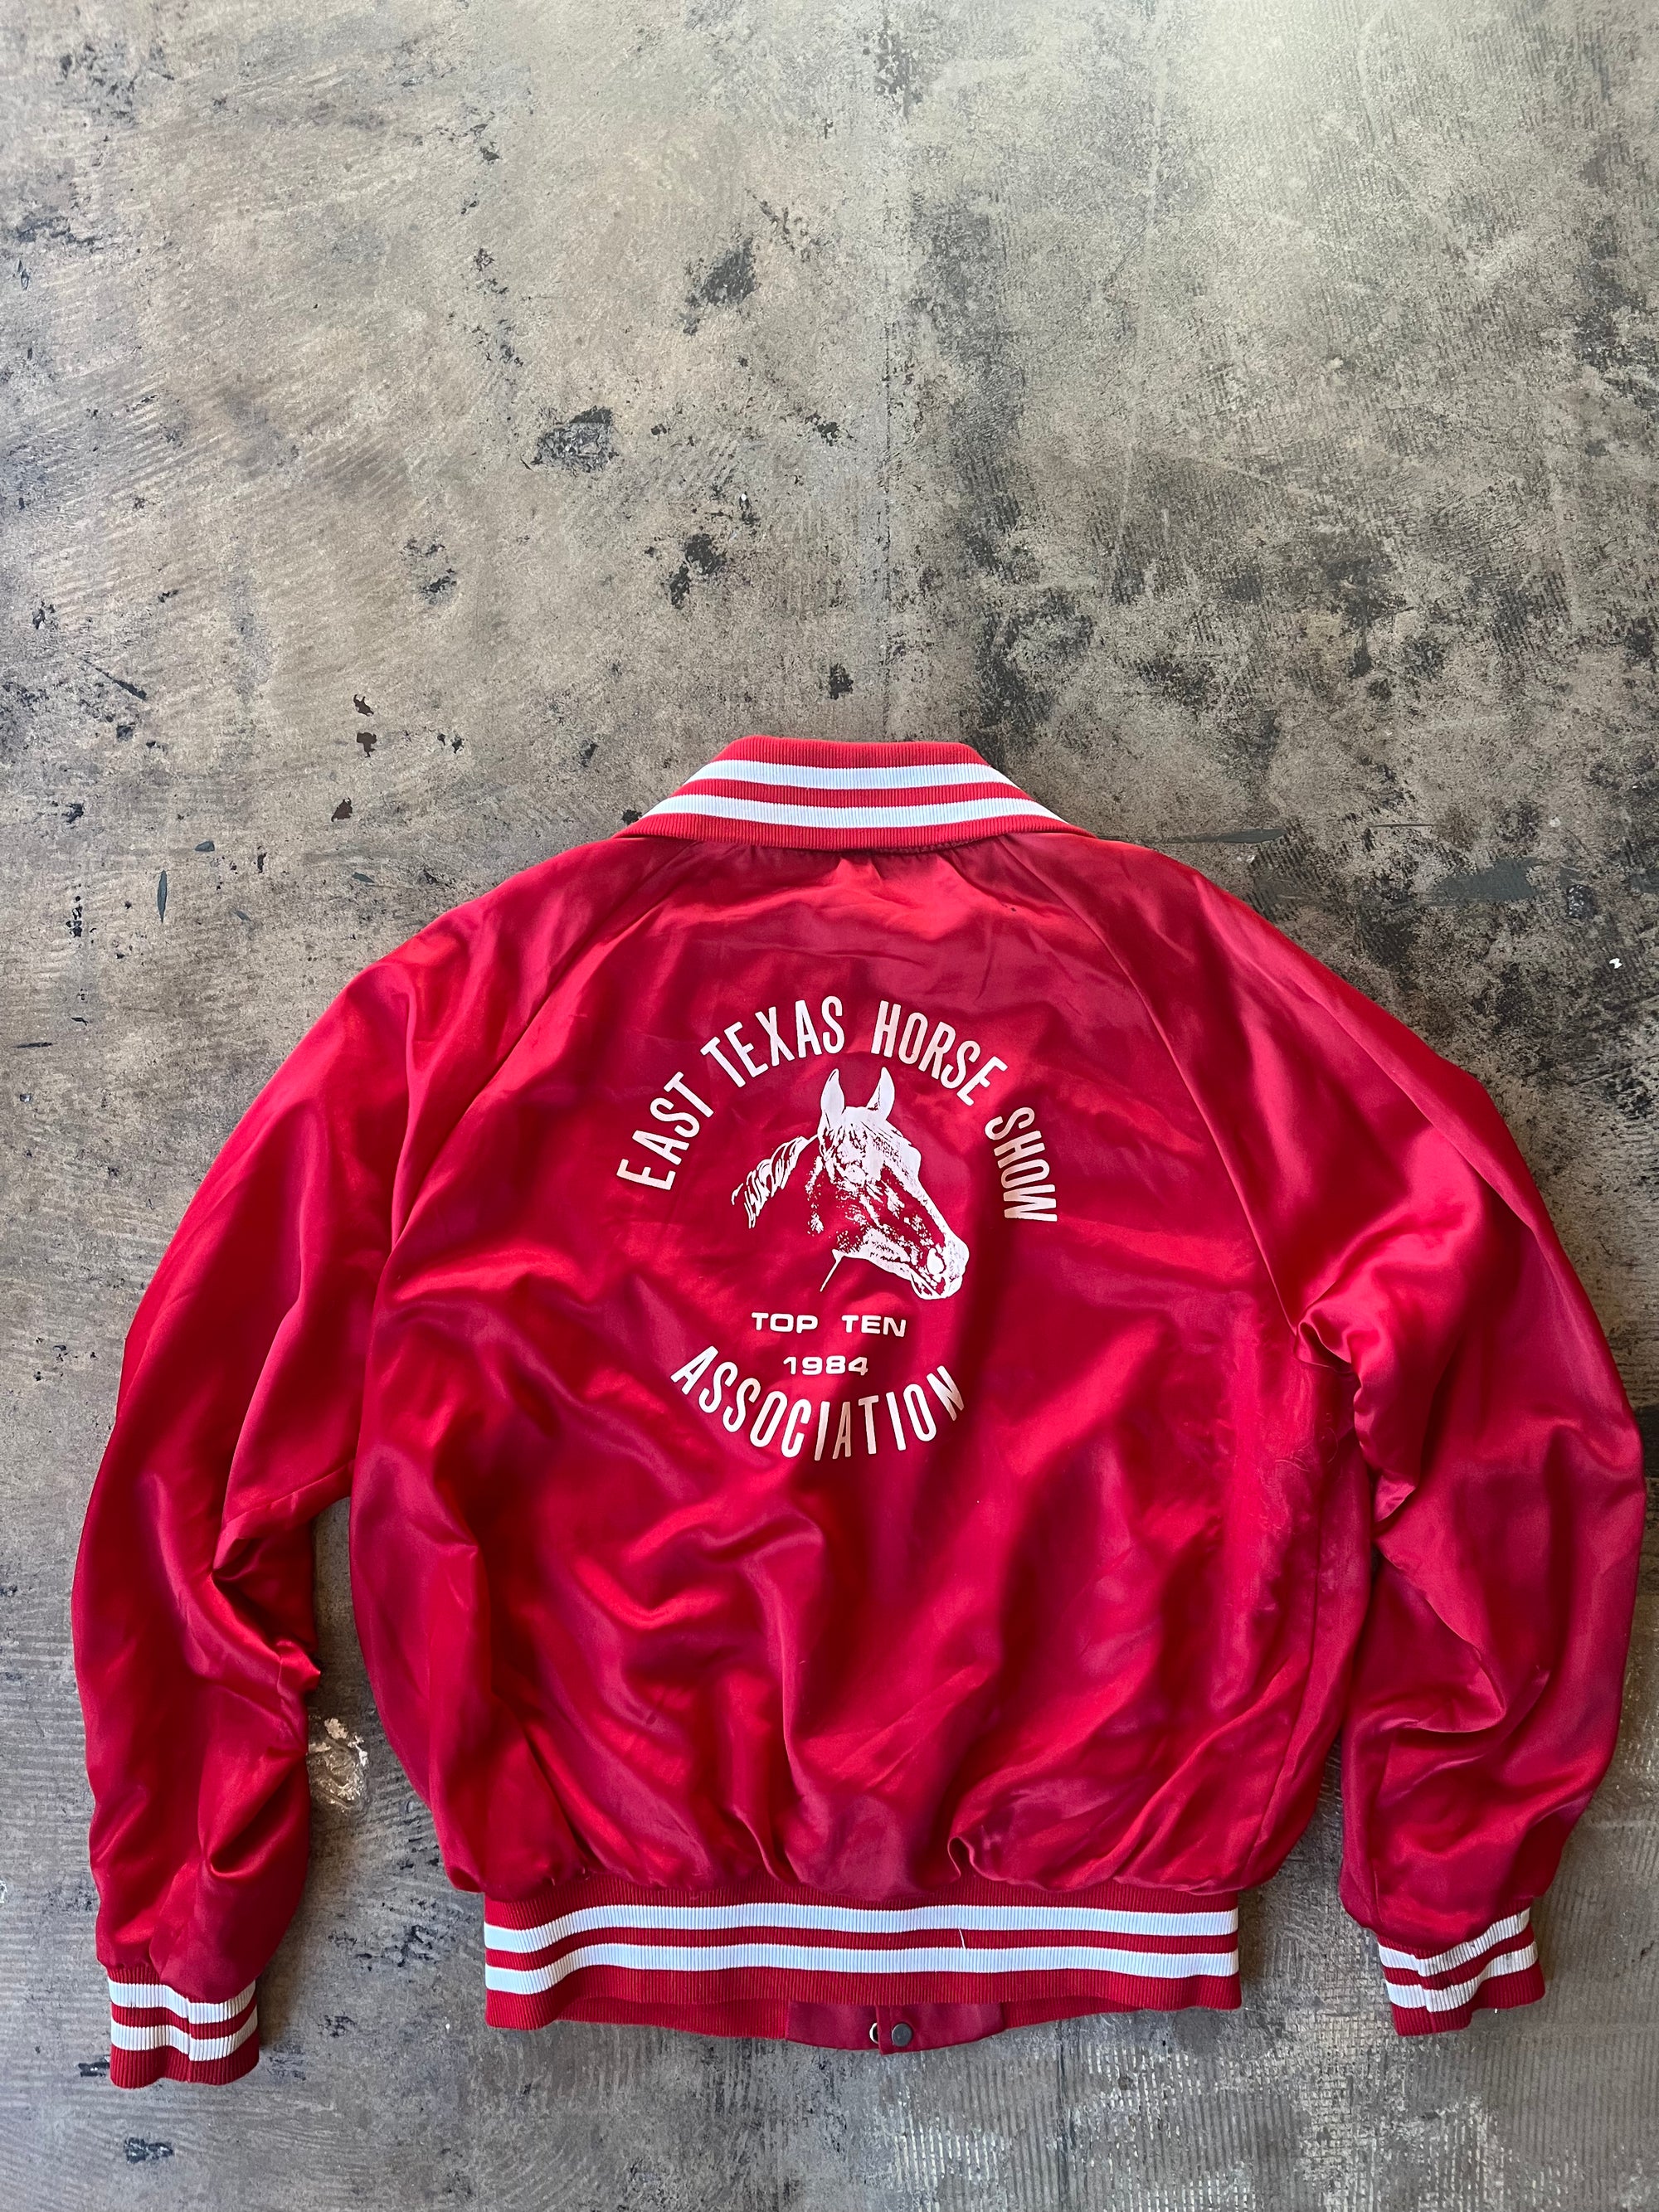 1984 East, Texas Horse Show Red Silk Bomber